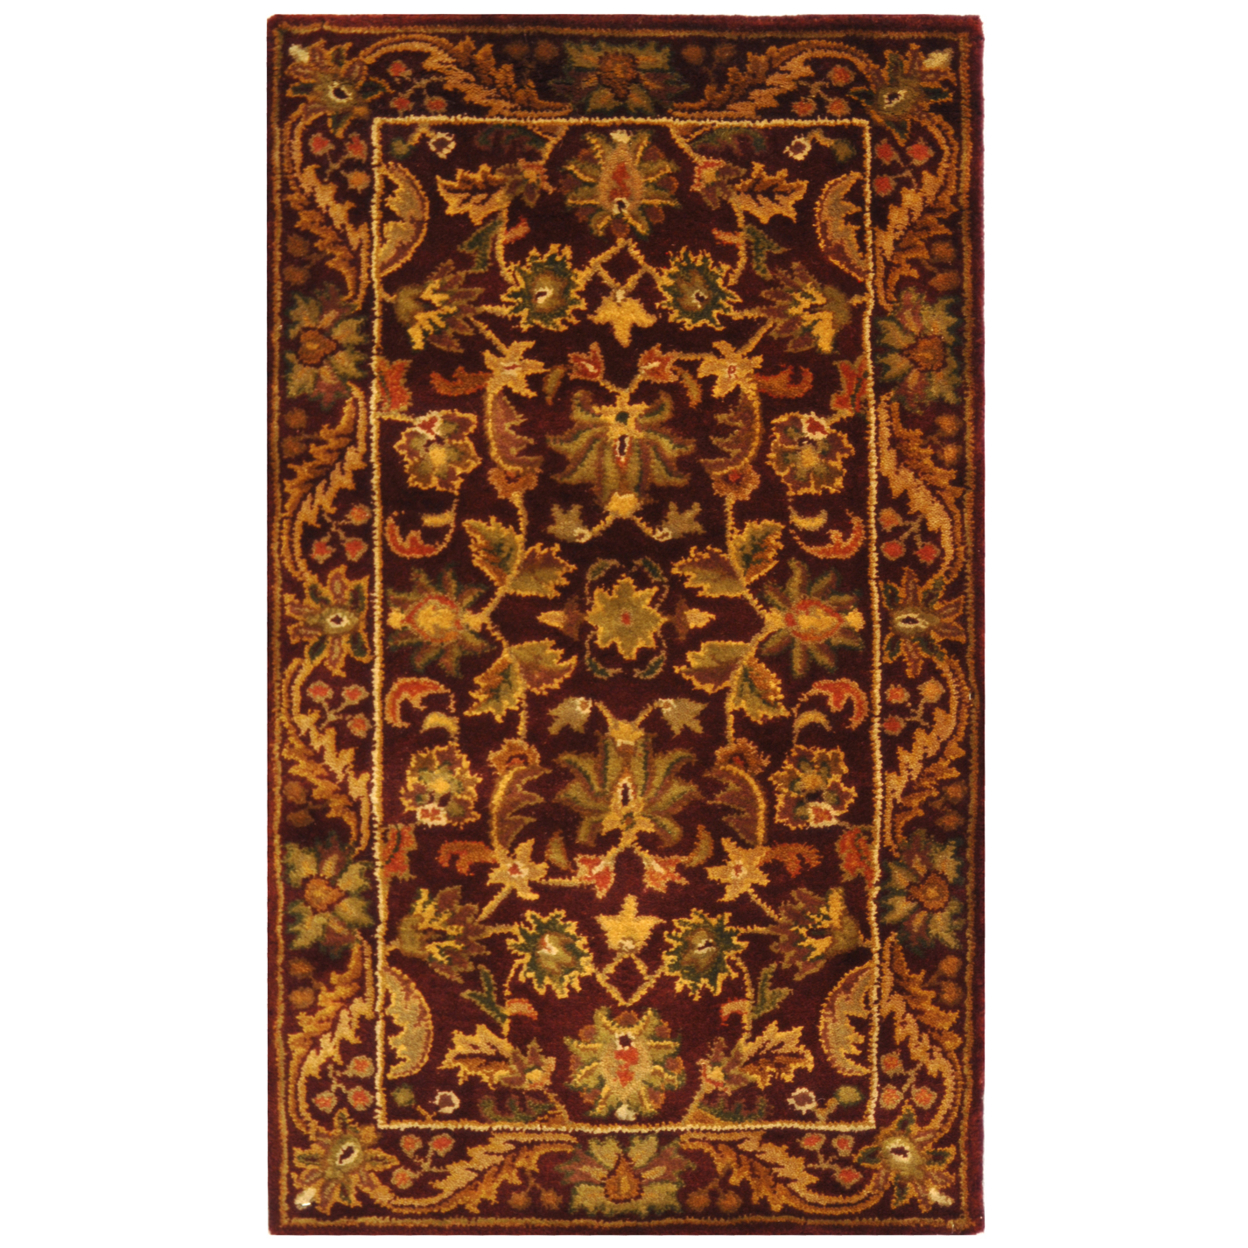 SAFAVIEH Antiquity Carmella Floral Bordered Wool Area Rug, Wine/Gold, 3' x 5' - image 4 of 10